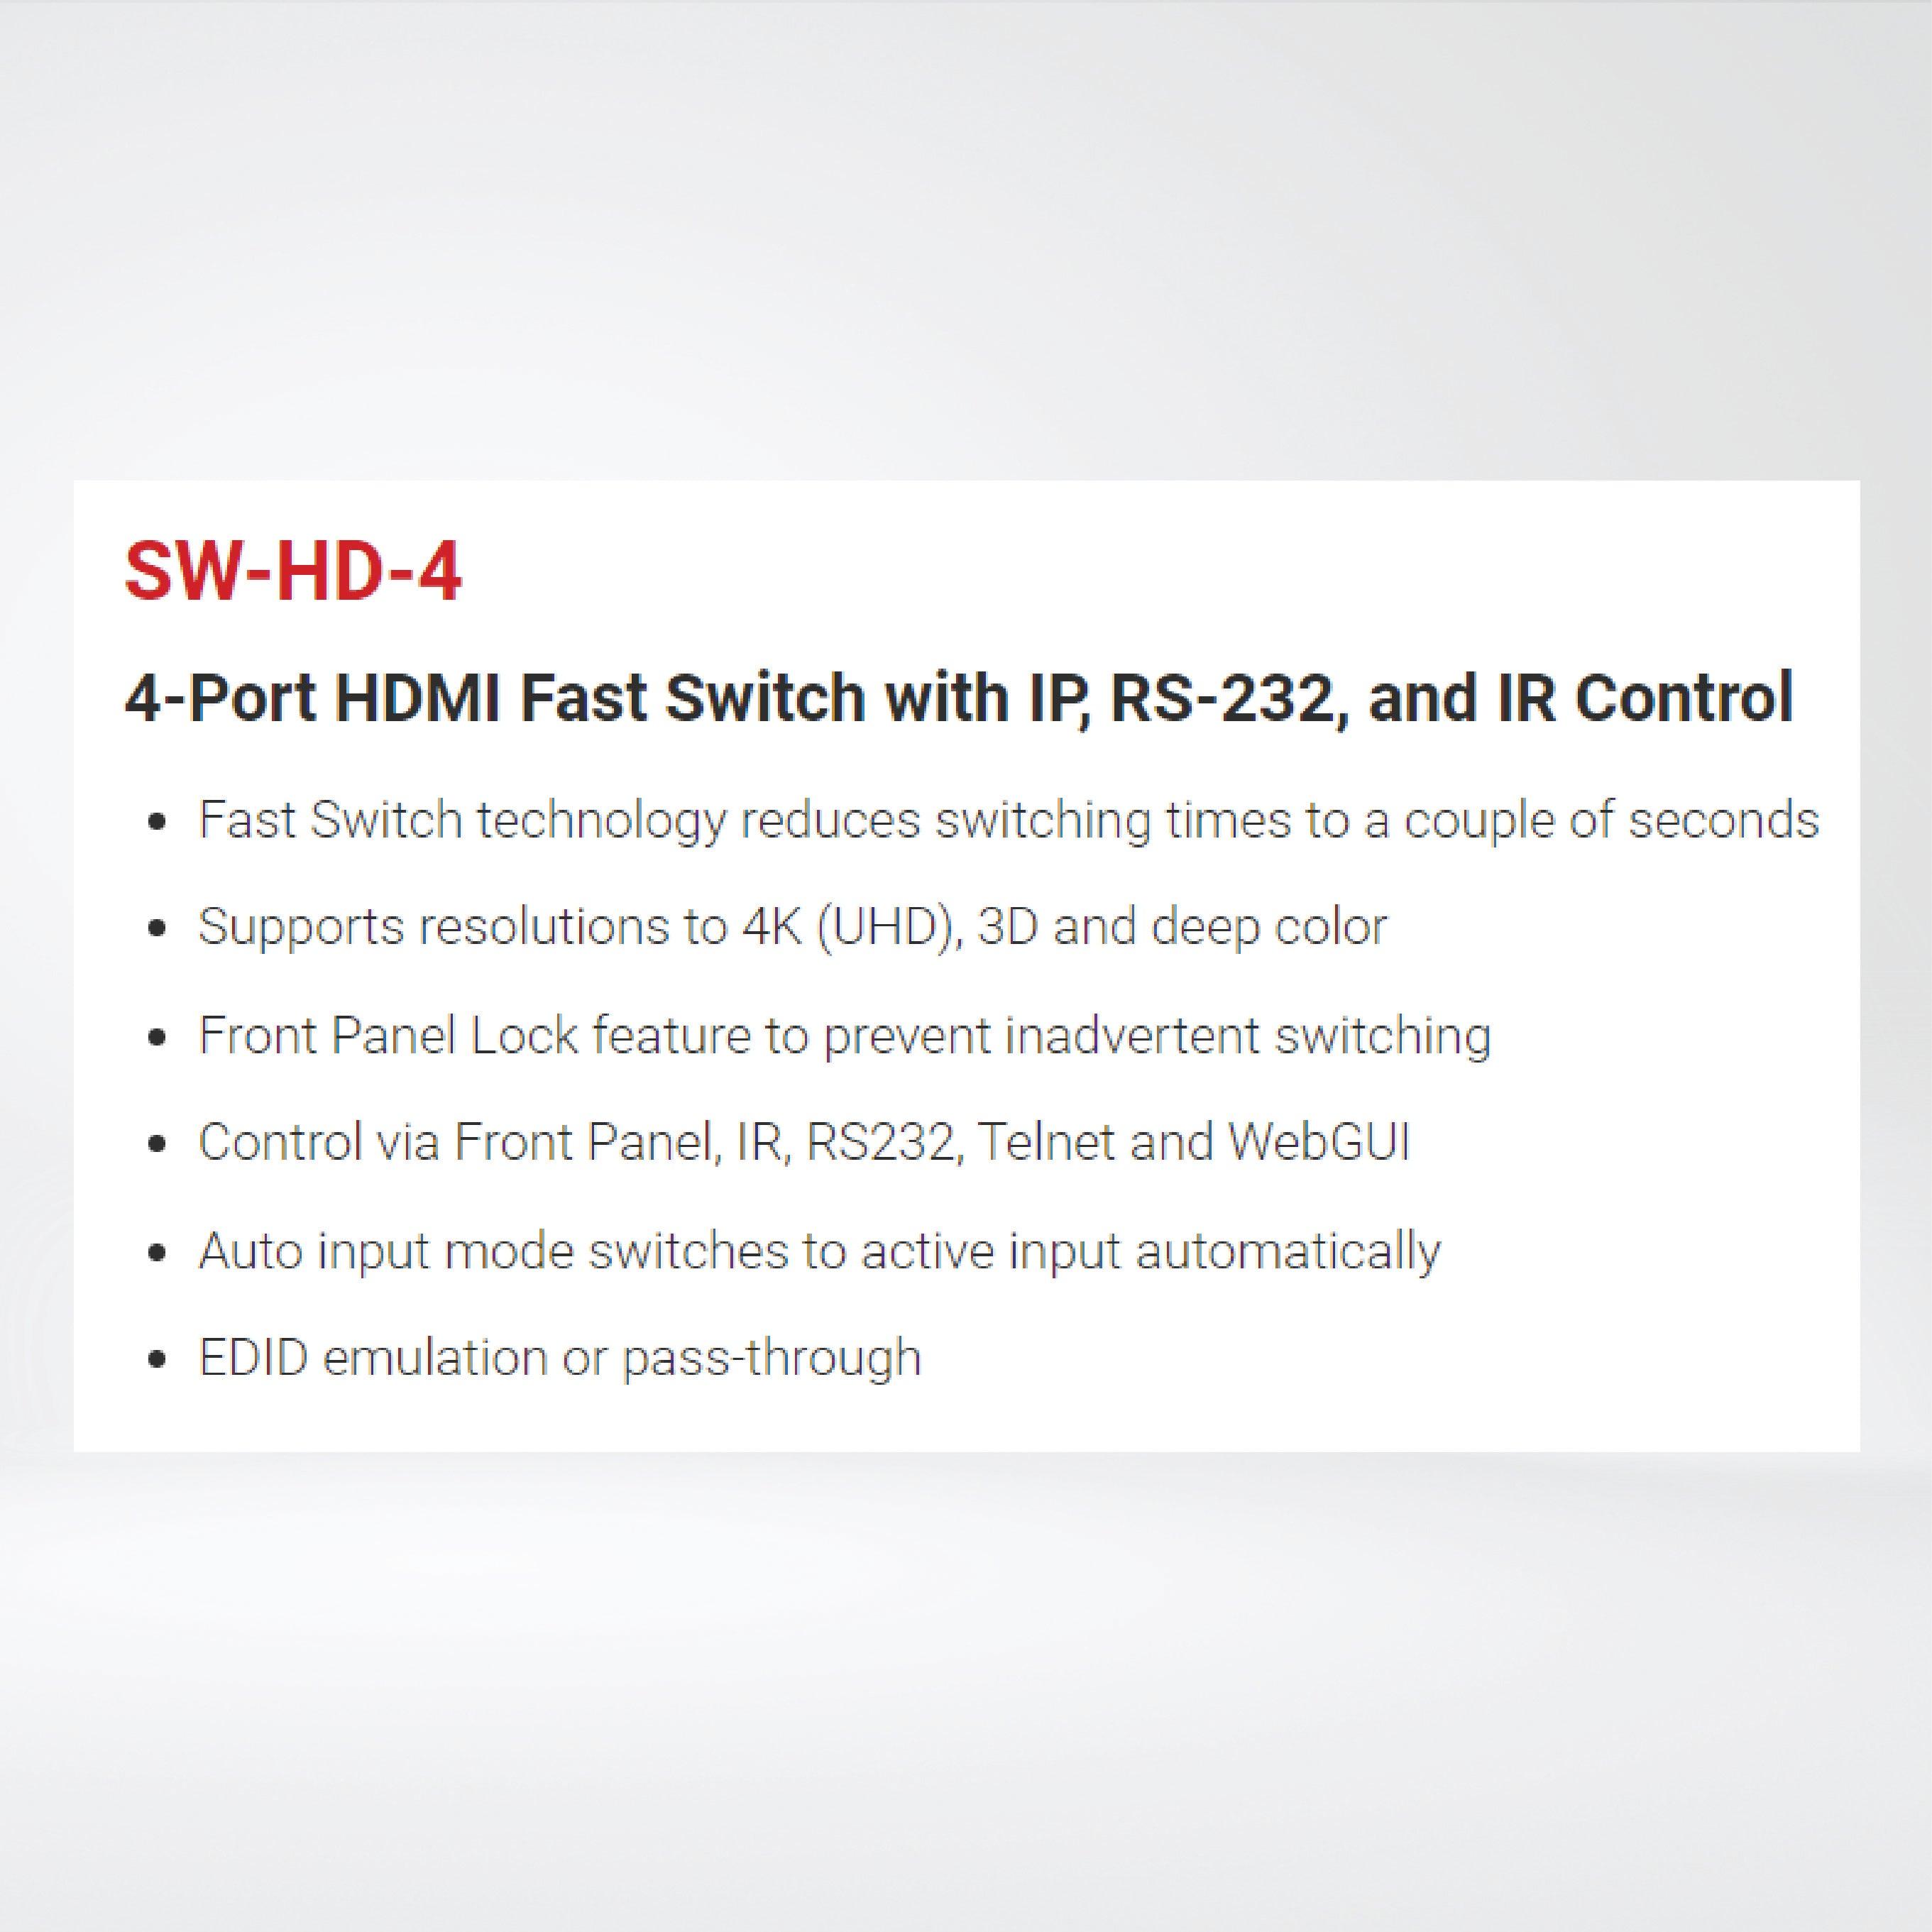 SW-HD-4 4-Port HDMI Fast Switch with IP, RS-232, and IR Control - Riverplus